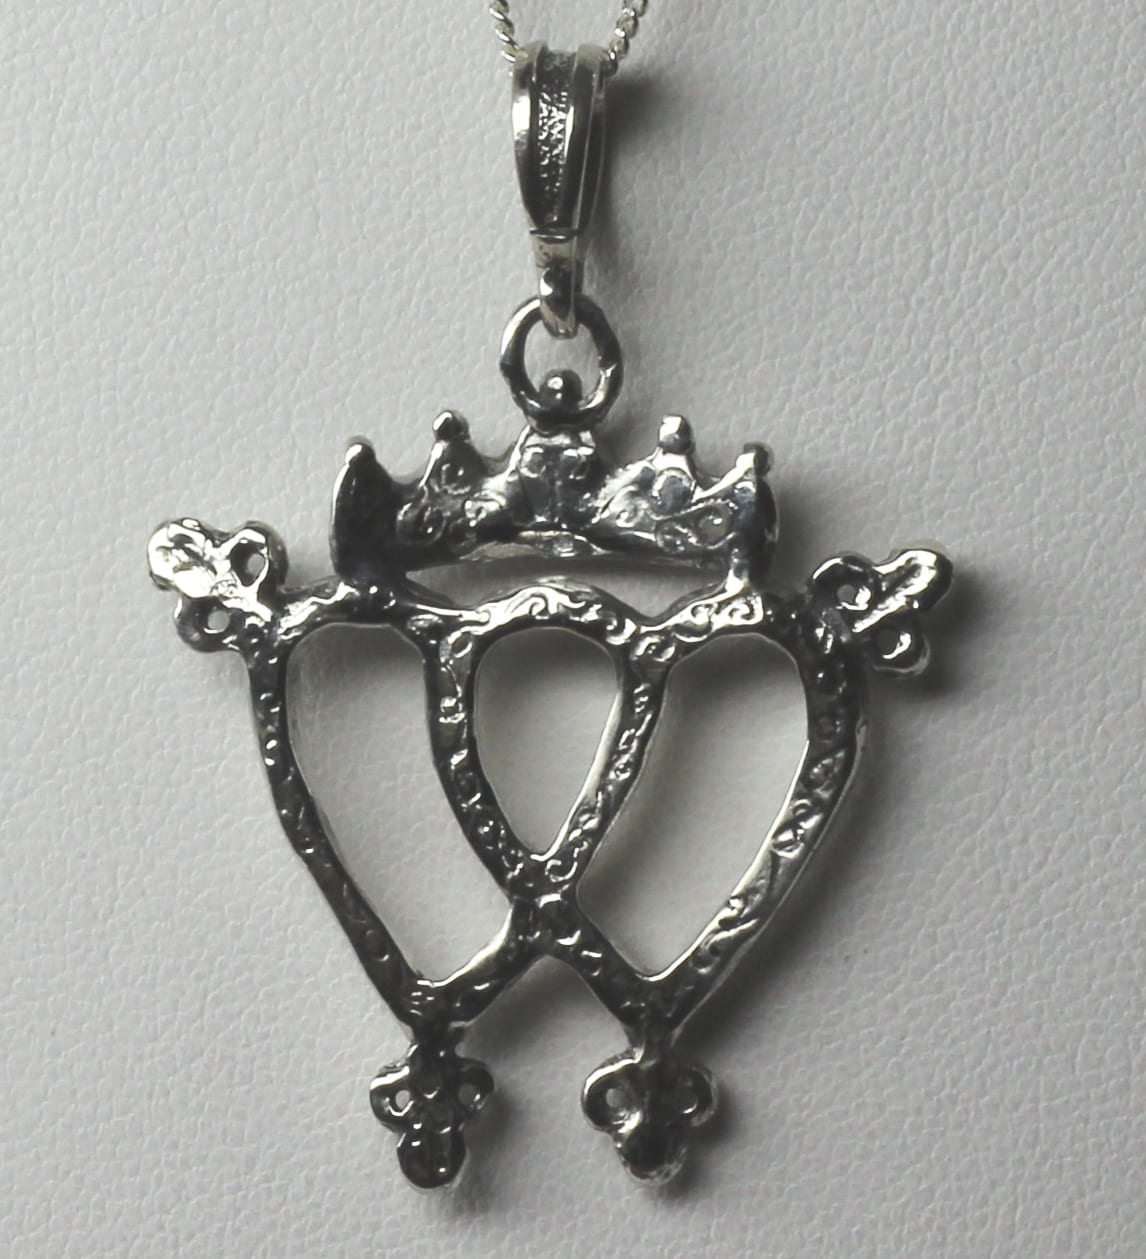 Scottish rose luckenbooth pendant in silver by Suzan Postgate ...